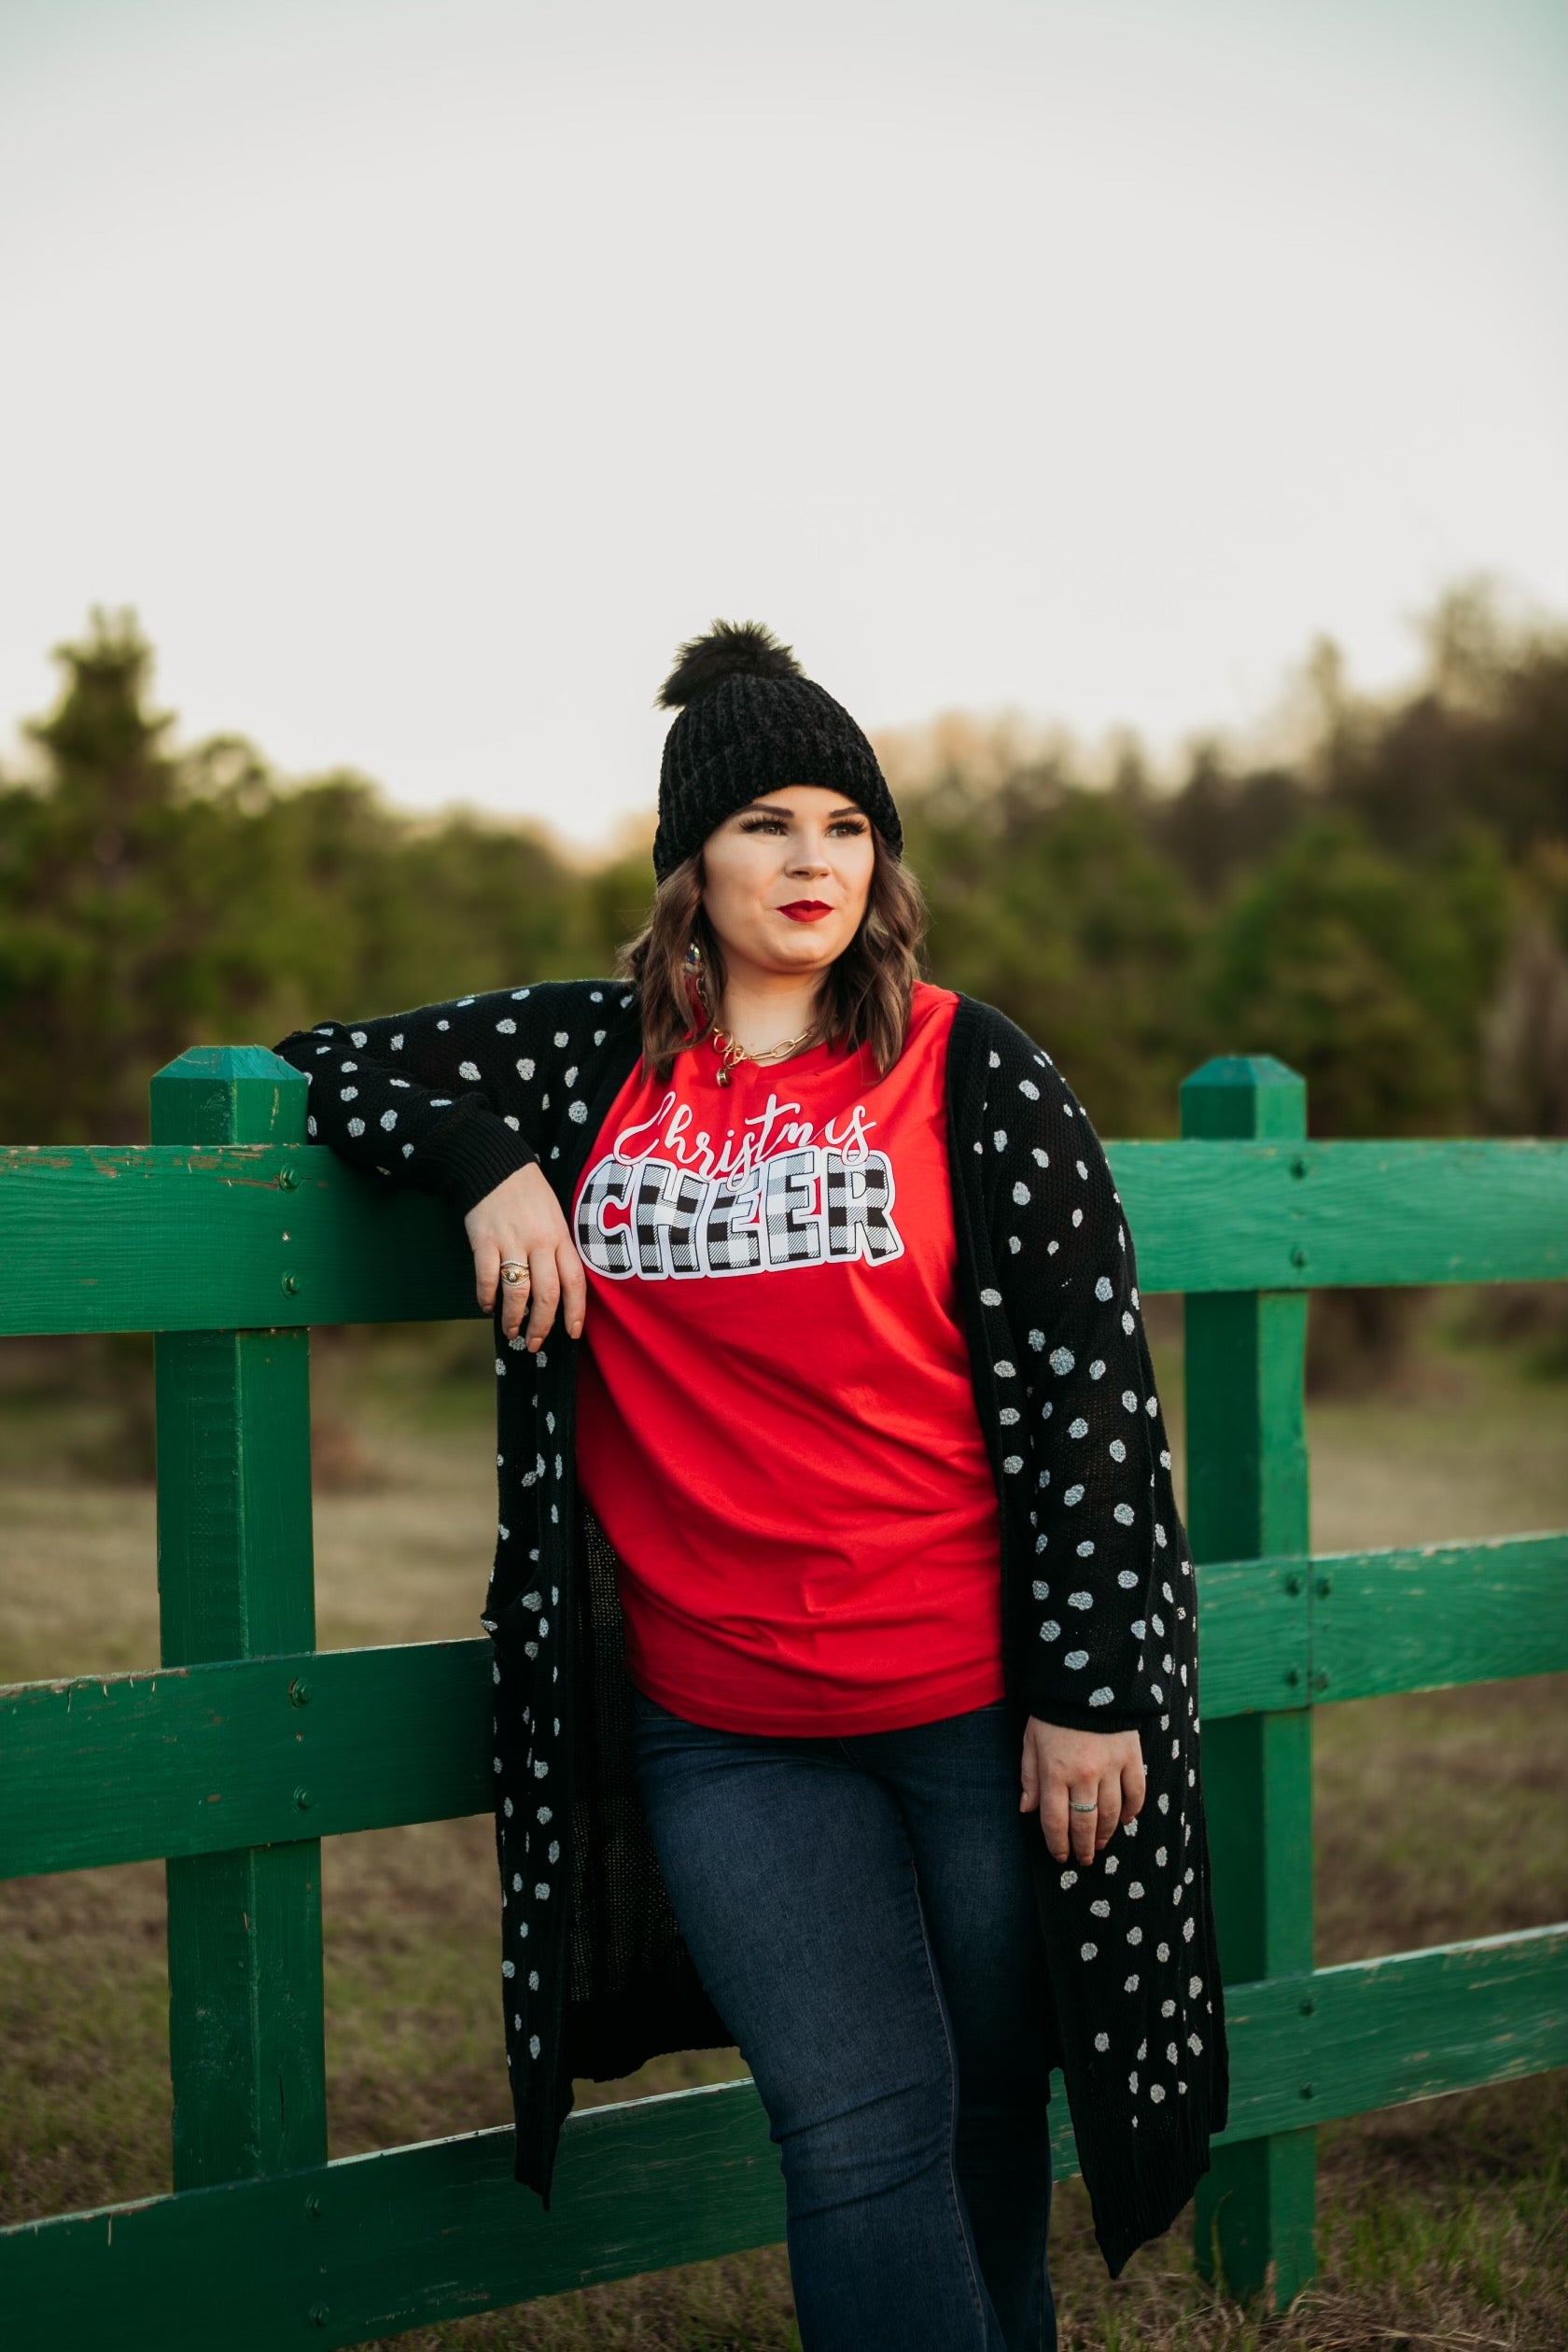 Christmas Cheer Short Sleeve Graphic Tee in Red - Giddy Up Glamour Boutique